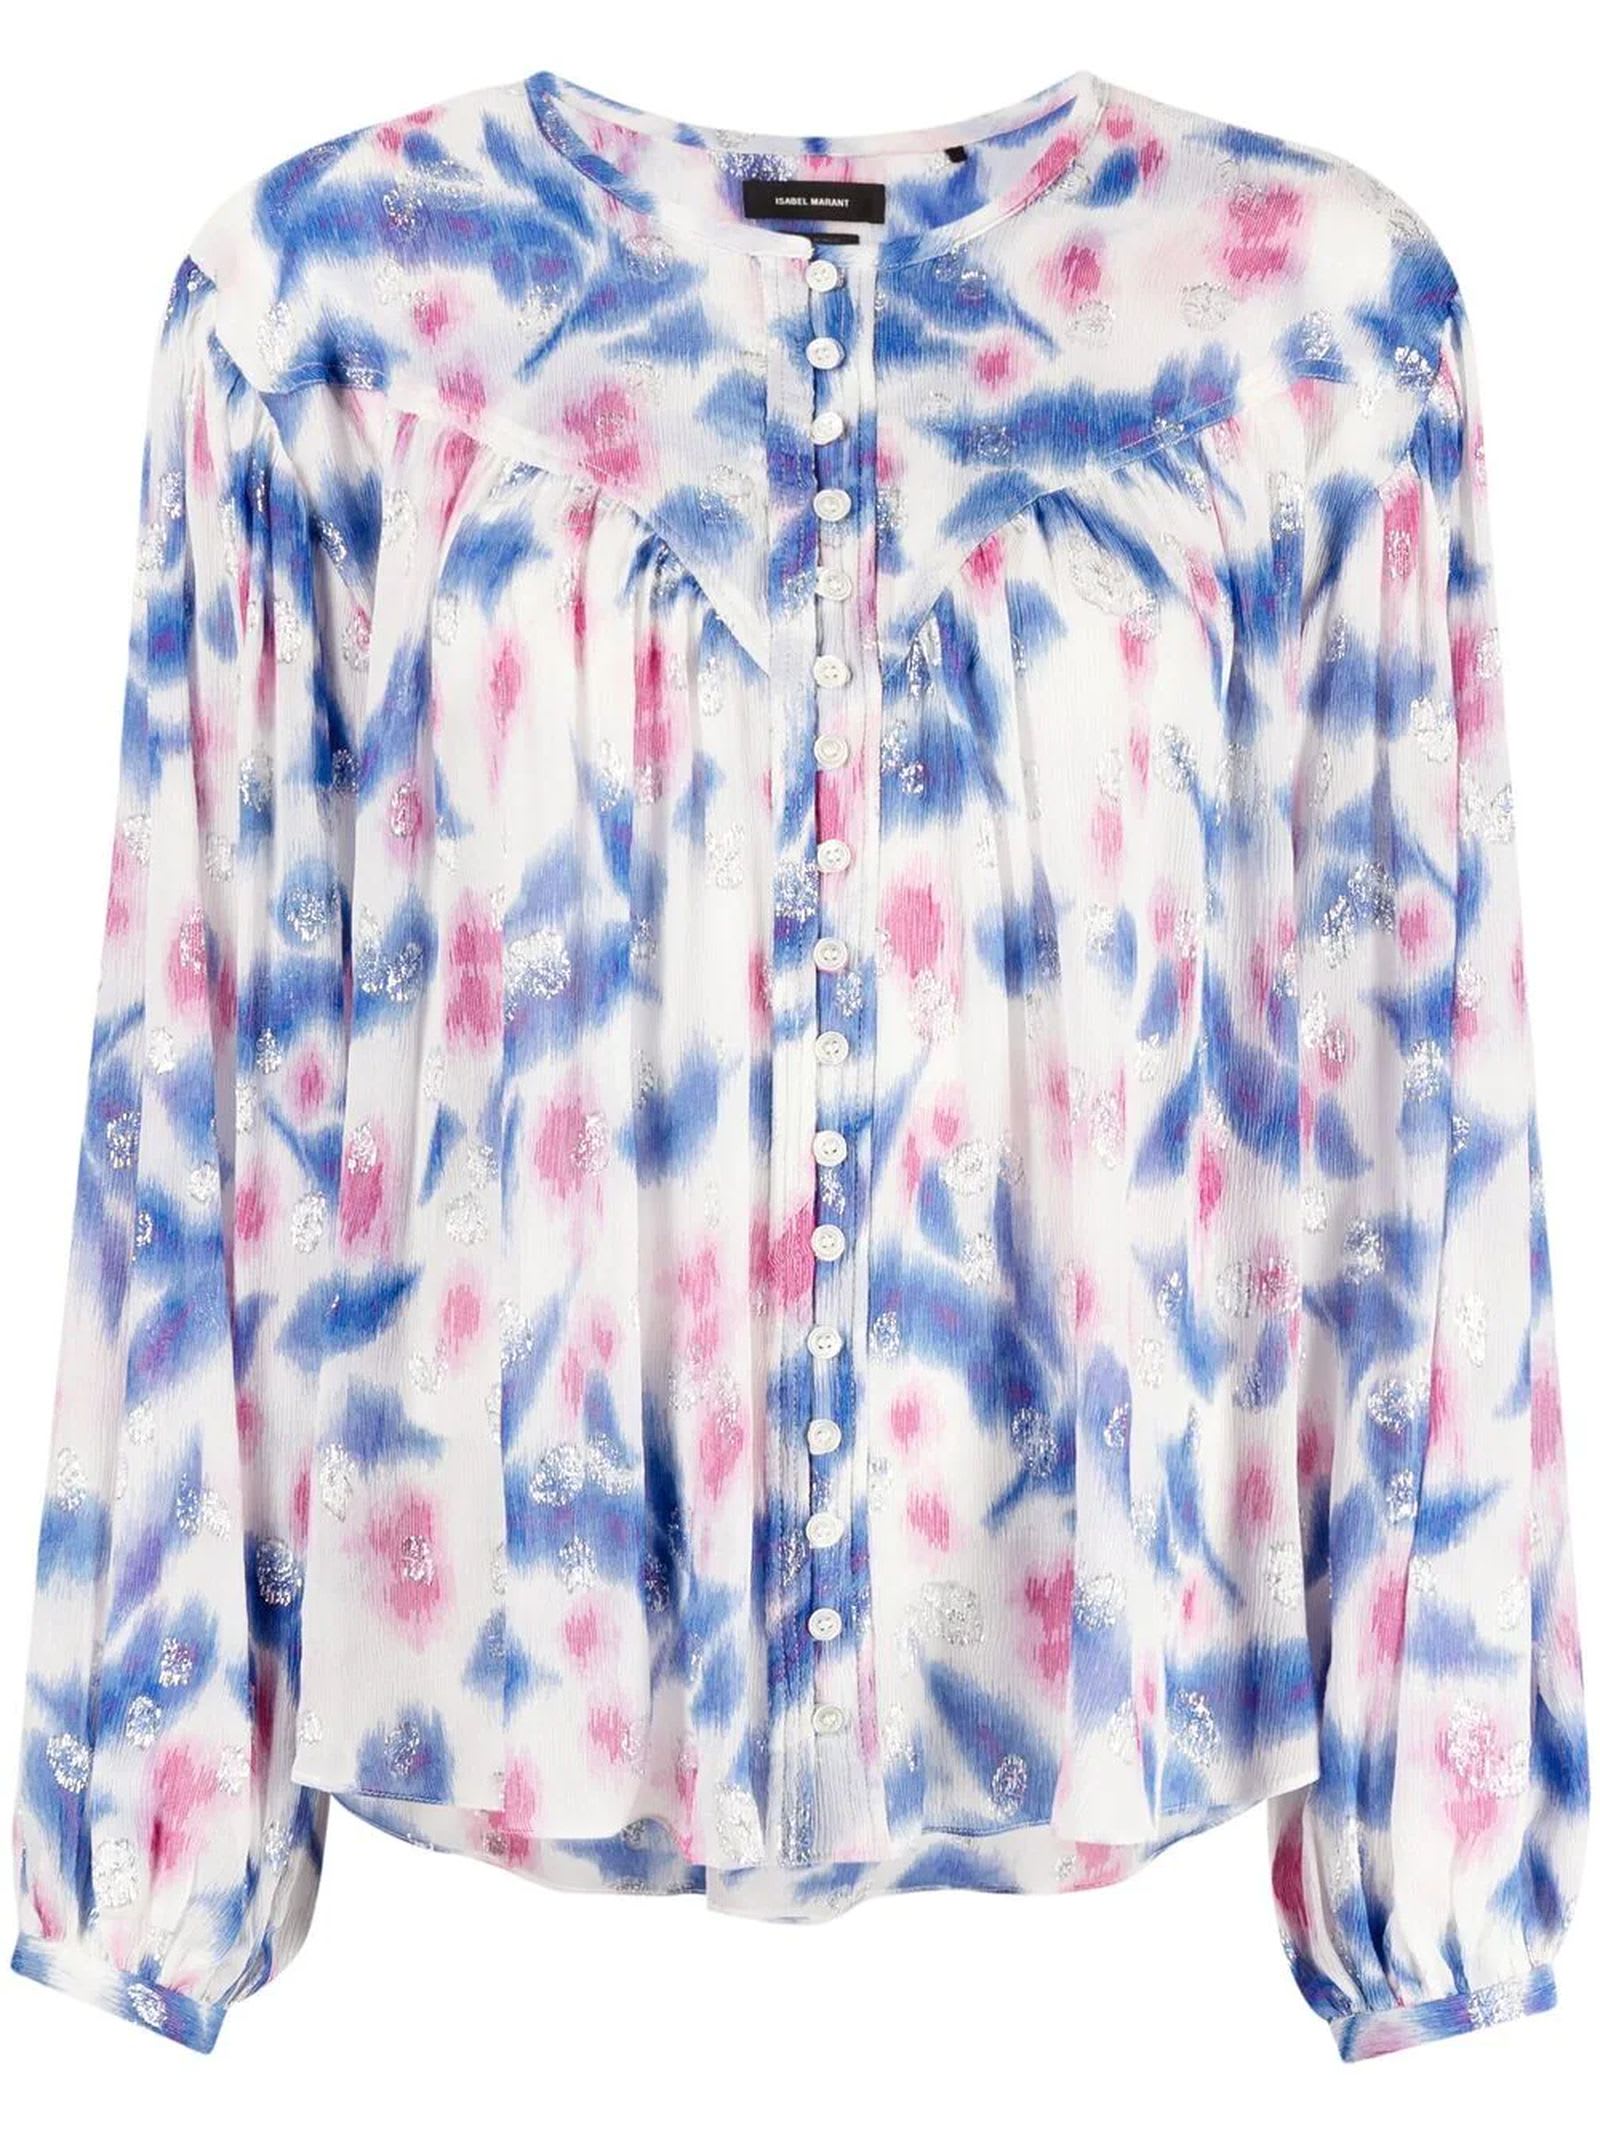 Isabel Marant White, Blue And Pink Silk-blend Blouse